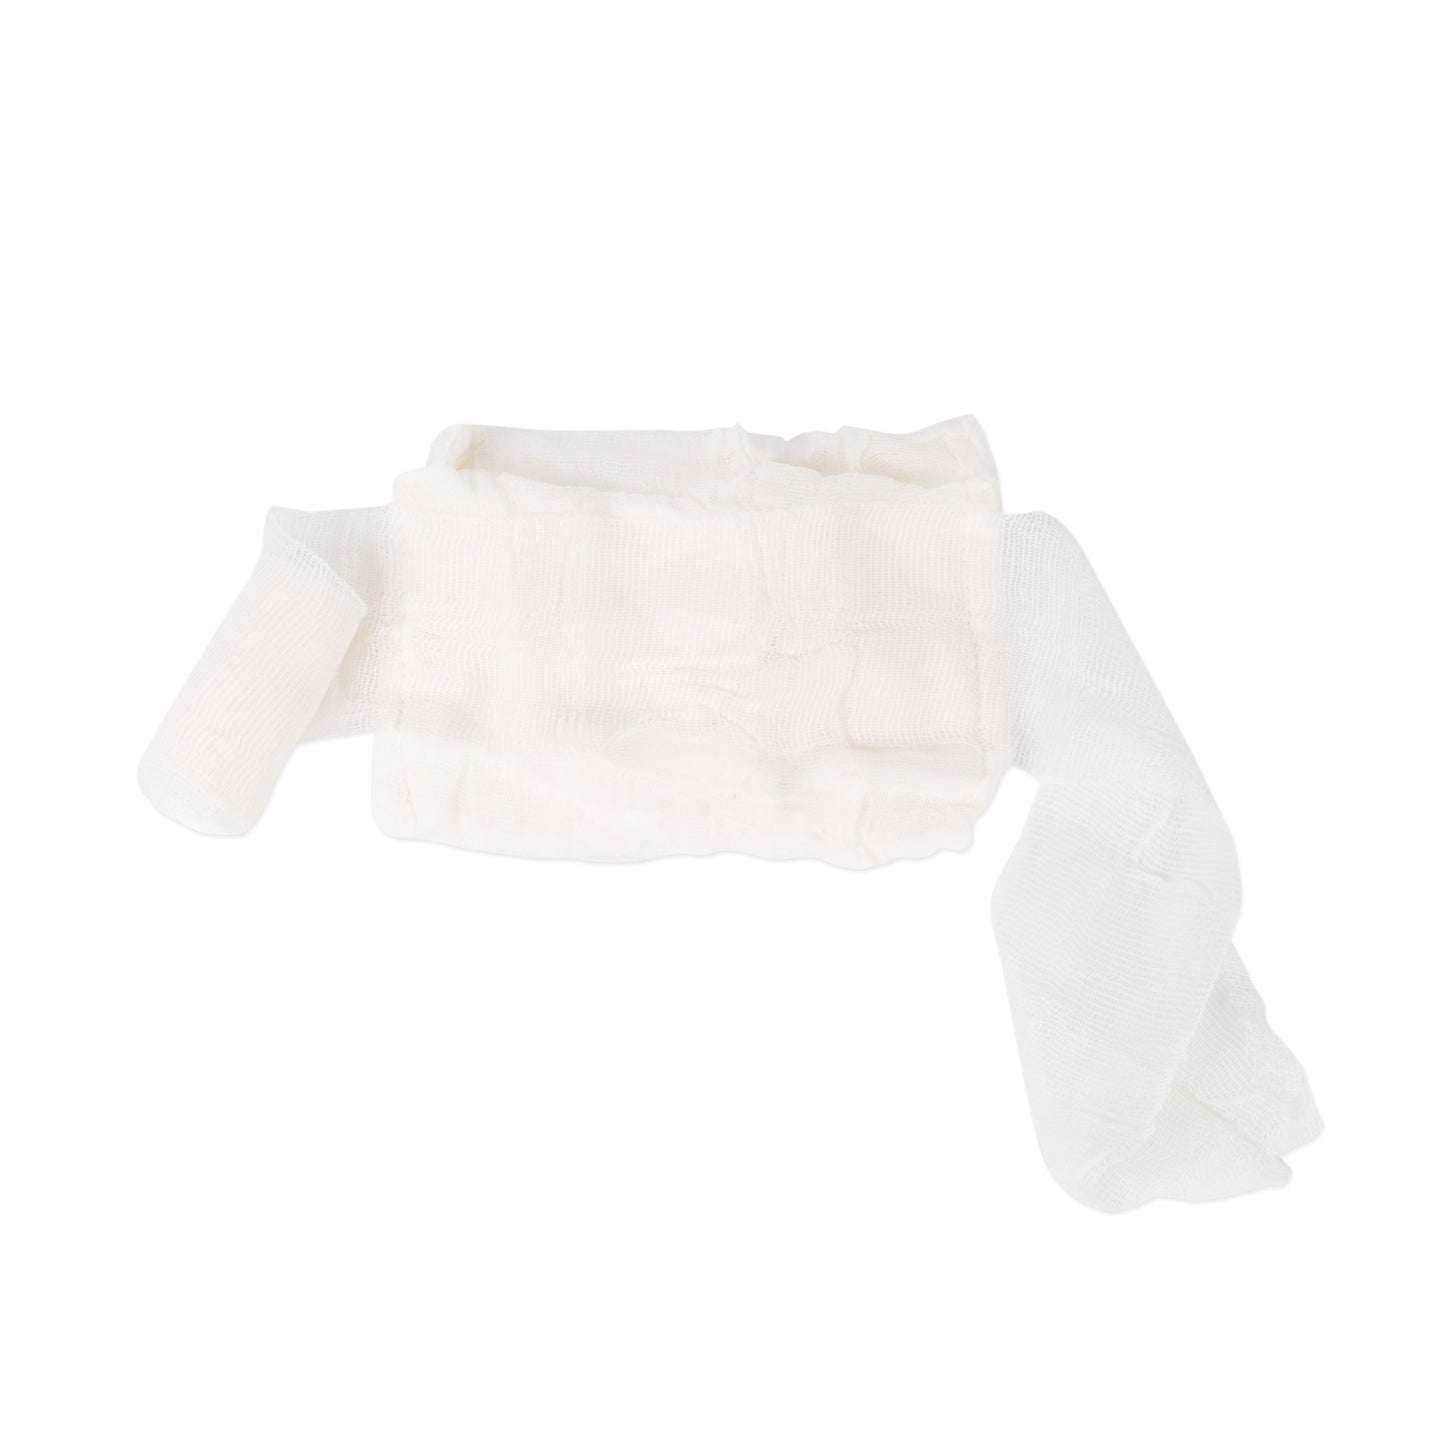 Wound Dressing No.15 Large 10204050